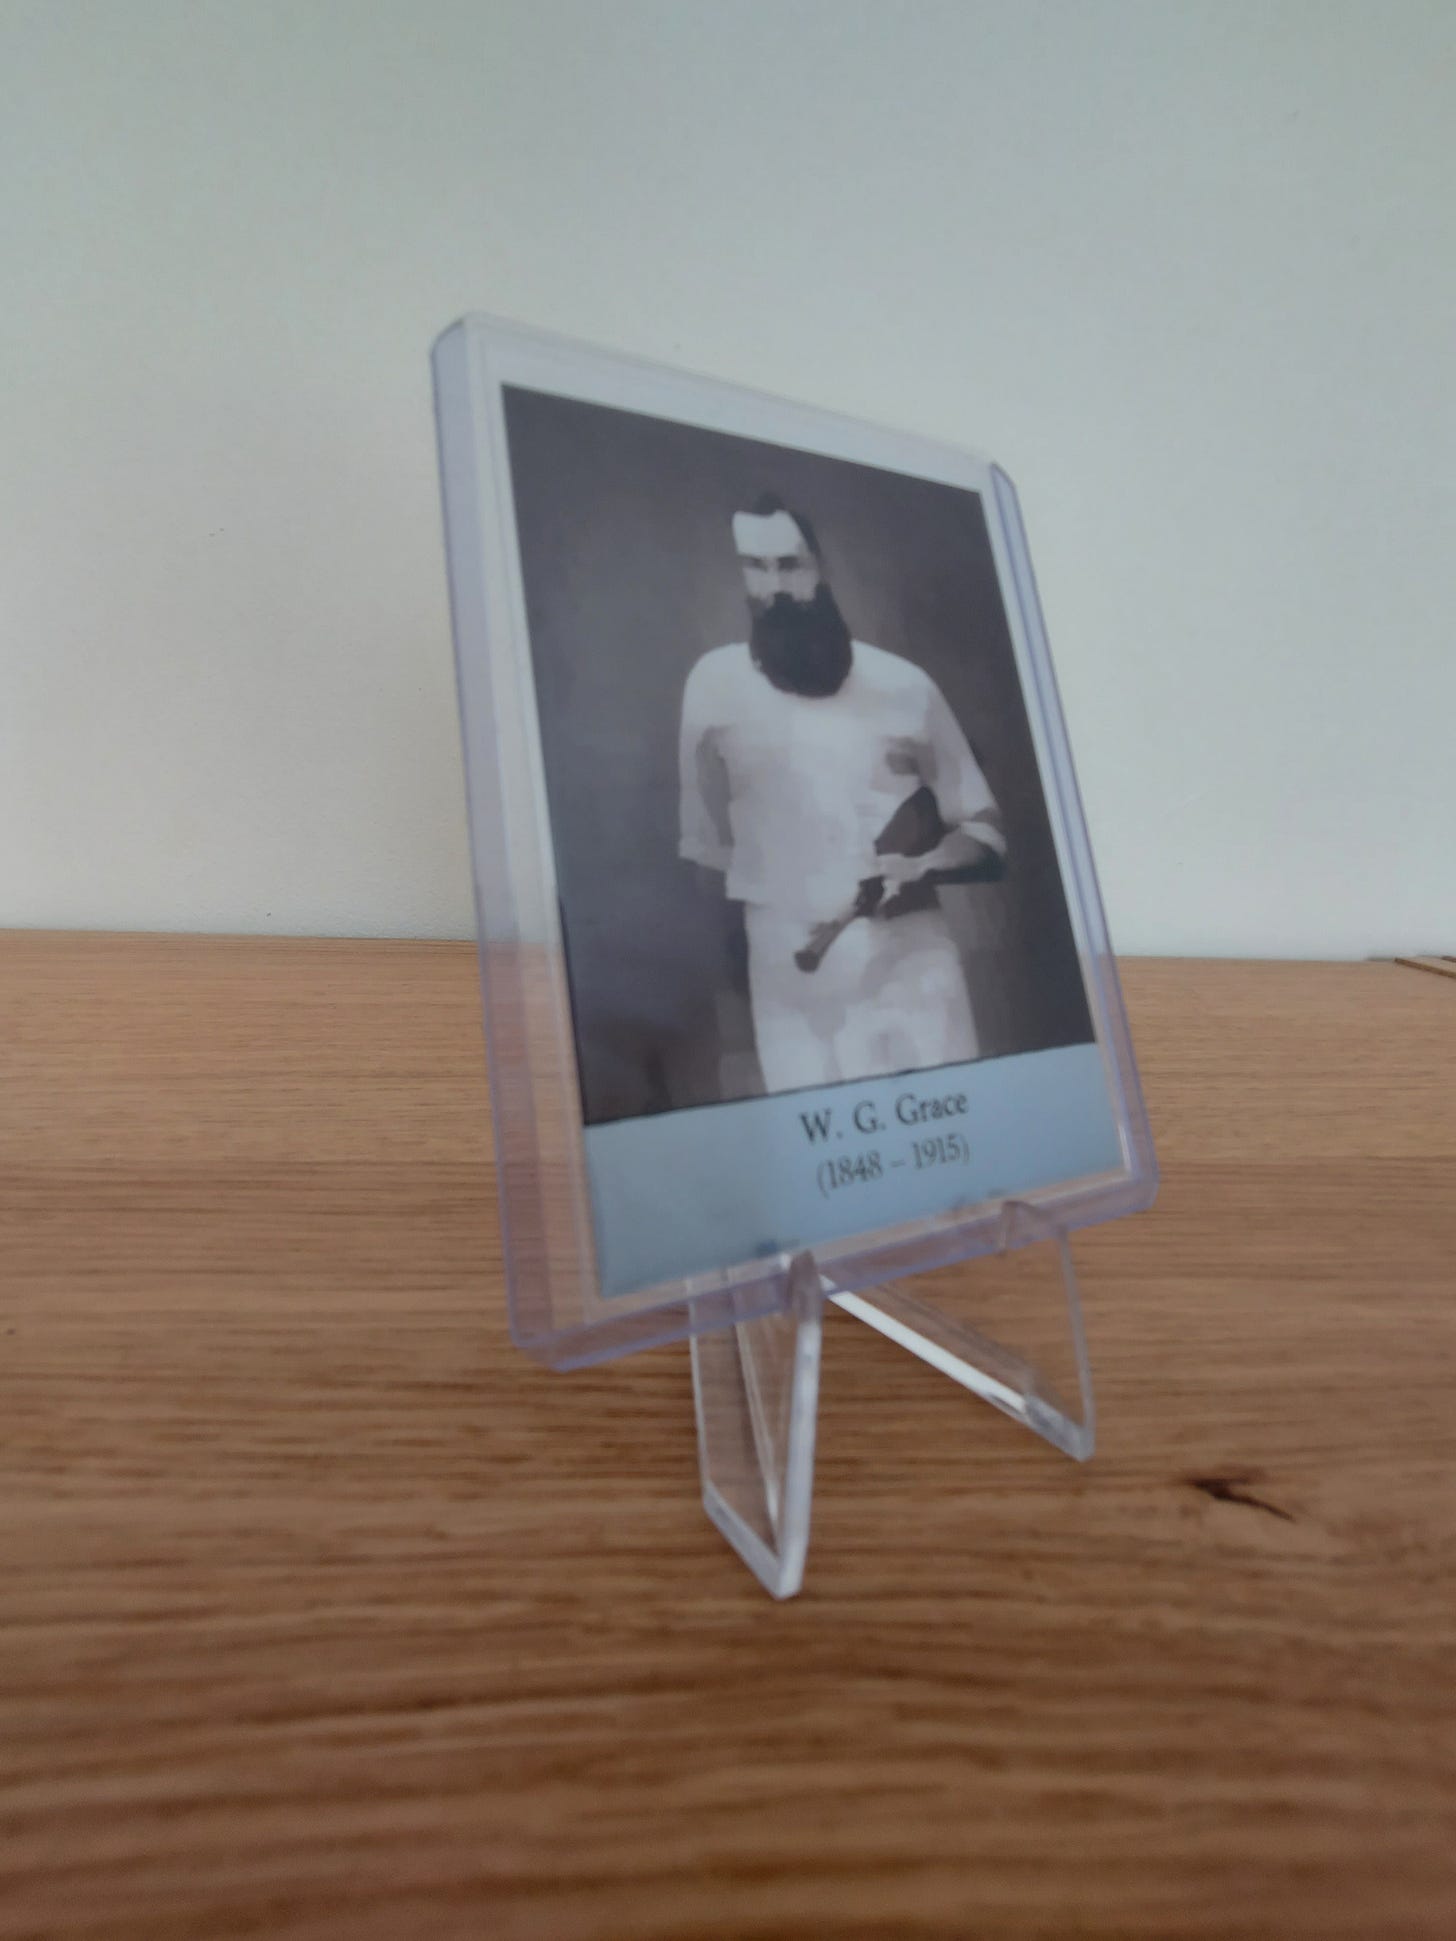 W.G. Grace trading card, in protective toploader on easel display on desk.